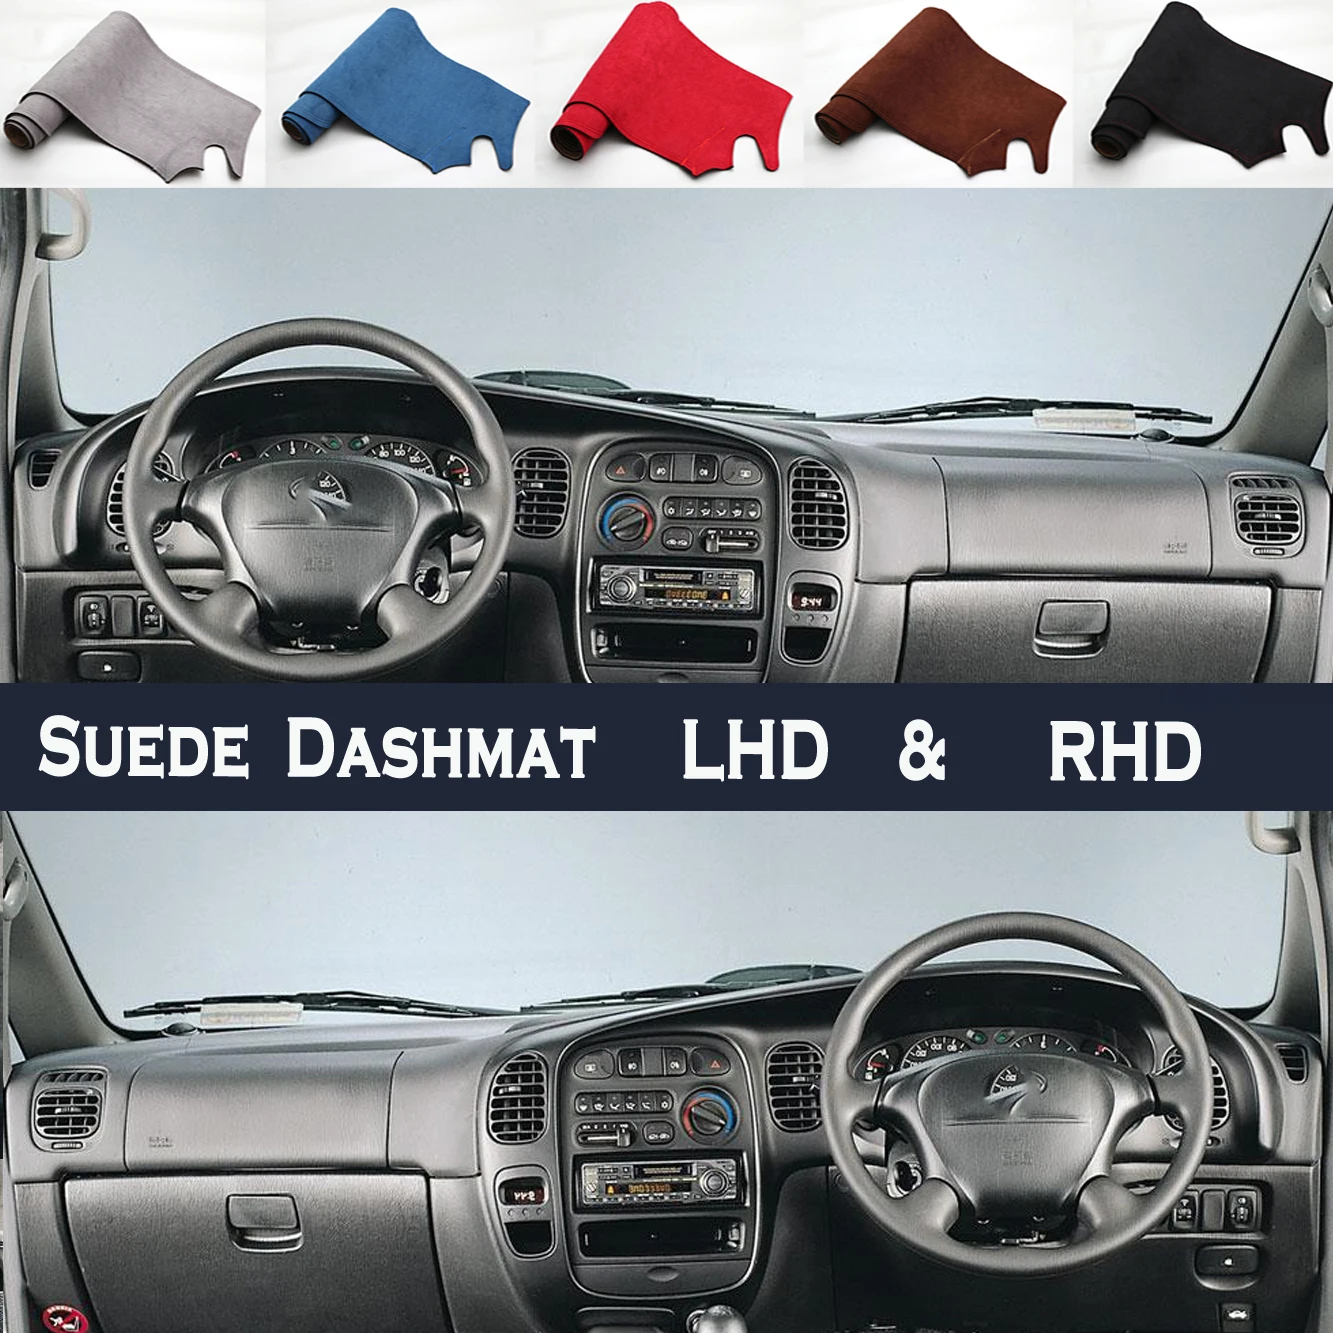 Car Styling Suede Dash Mat Covers Dashmat Dashboard Pad Protector Accessory For Hyundai H1 Starex MPV A1 H-1 1997 - 2007